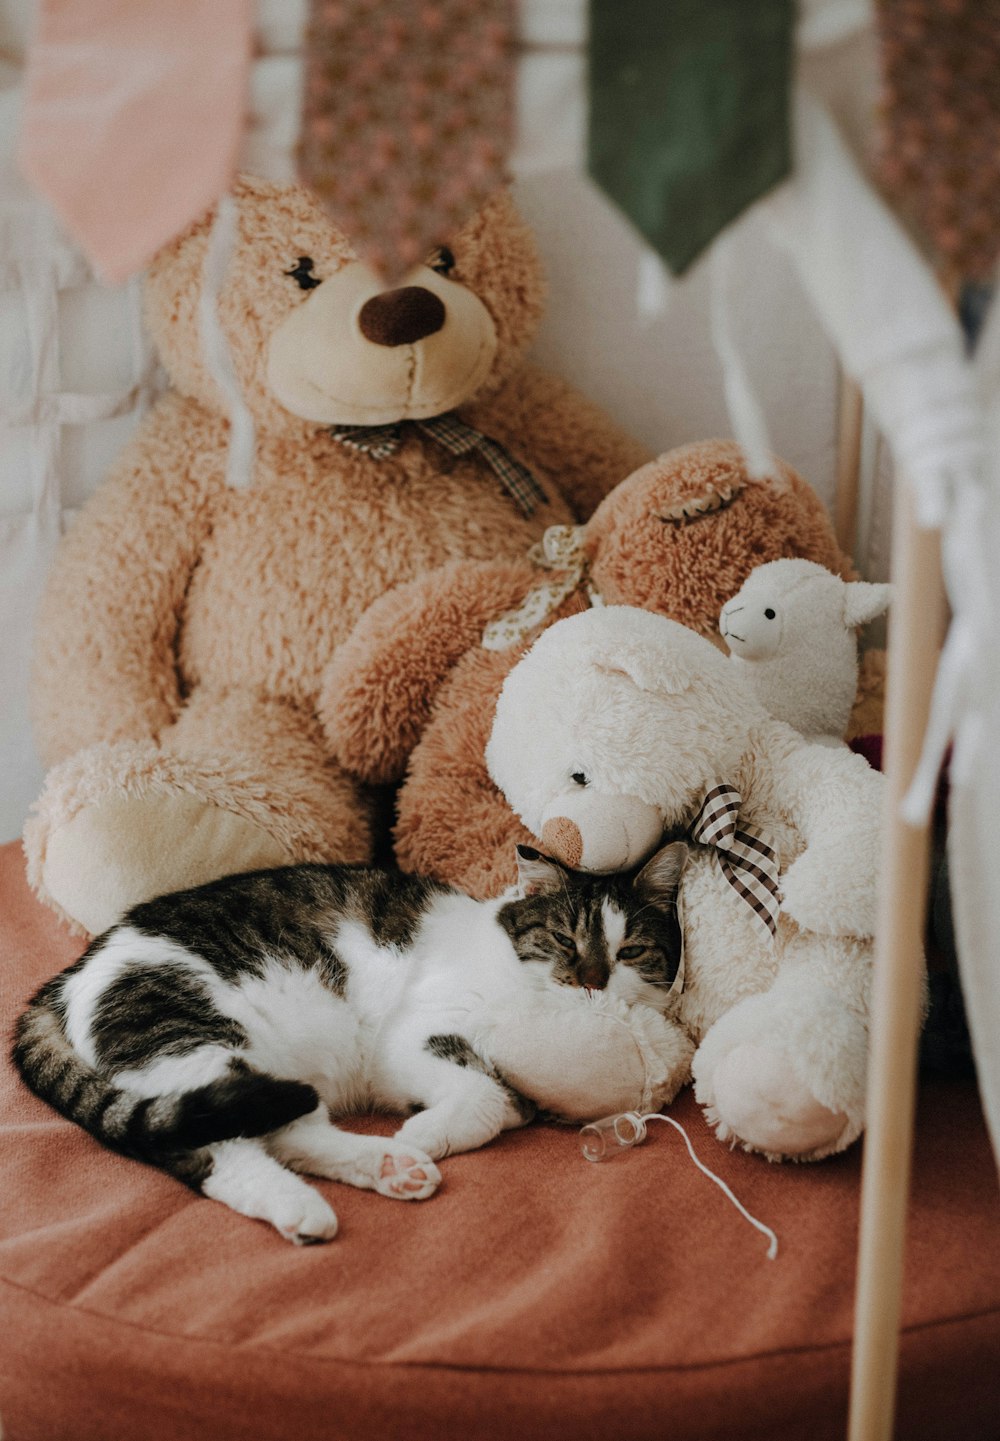 a cat laying on a chair next to stuffed animals